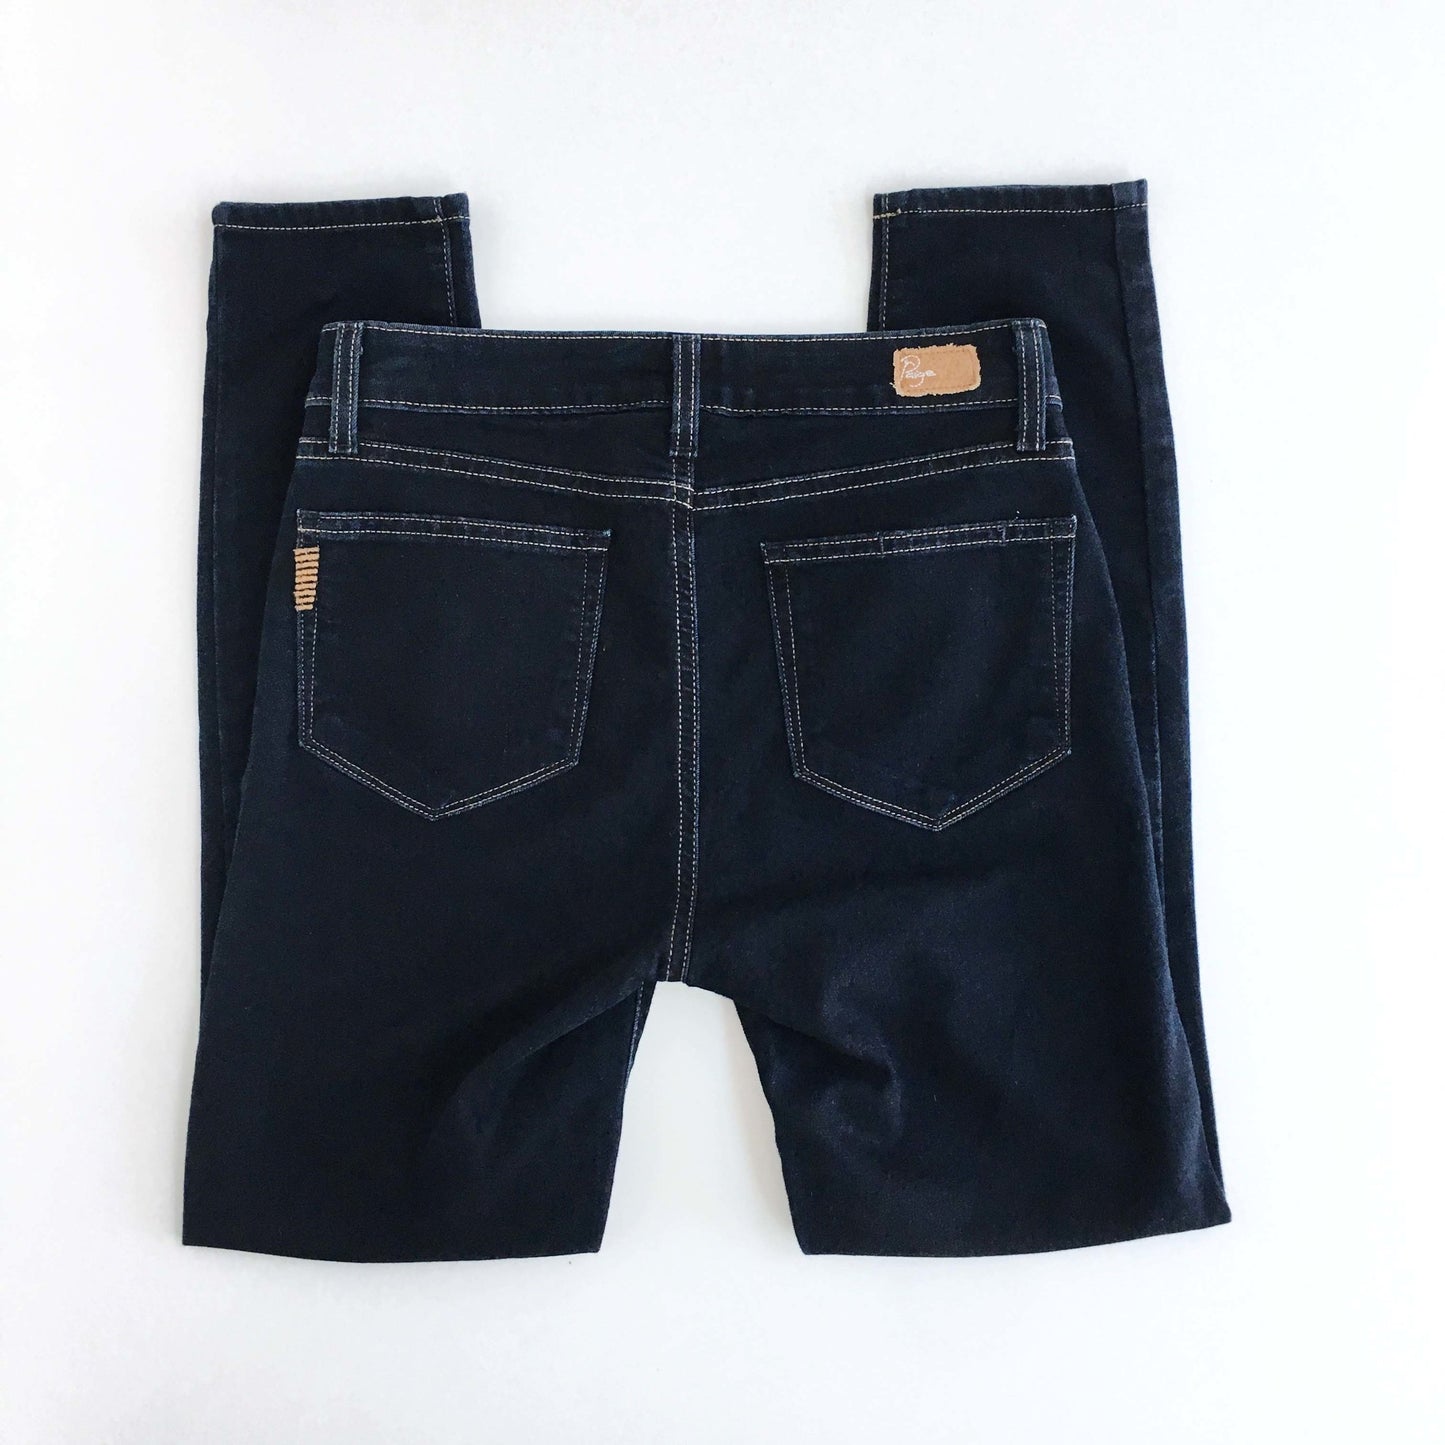 Paige Hoxton high rise skinny - size 26/27